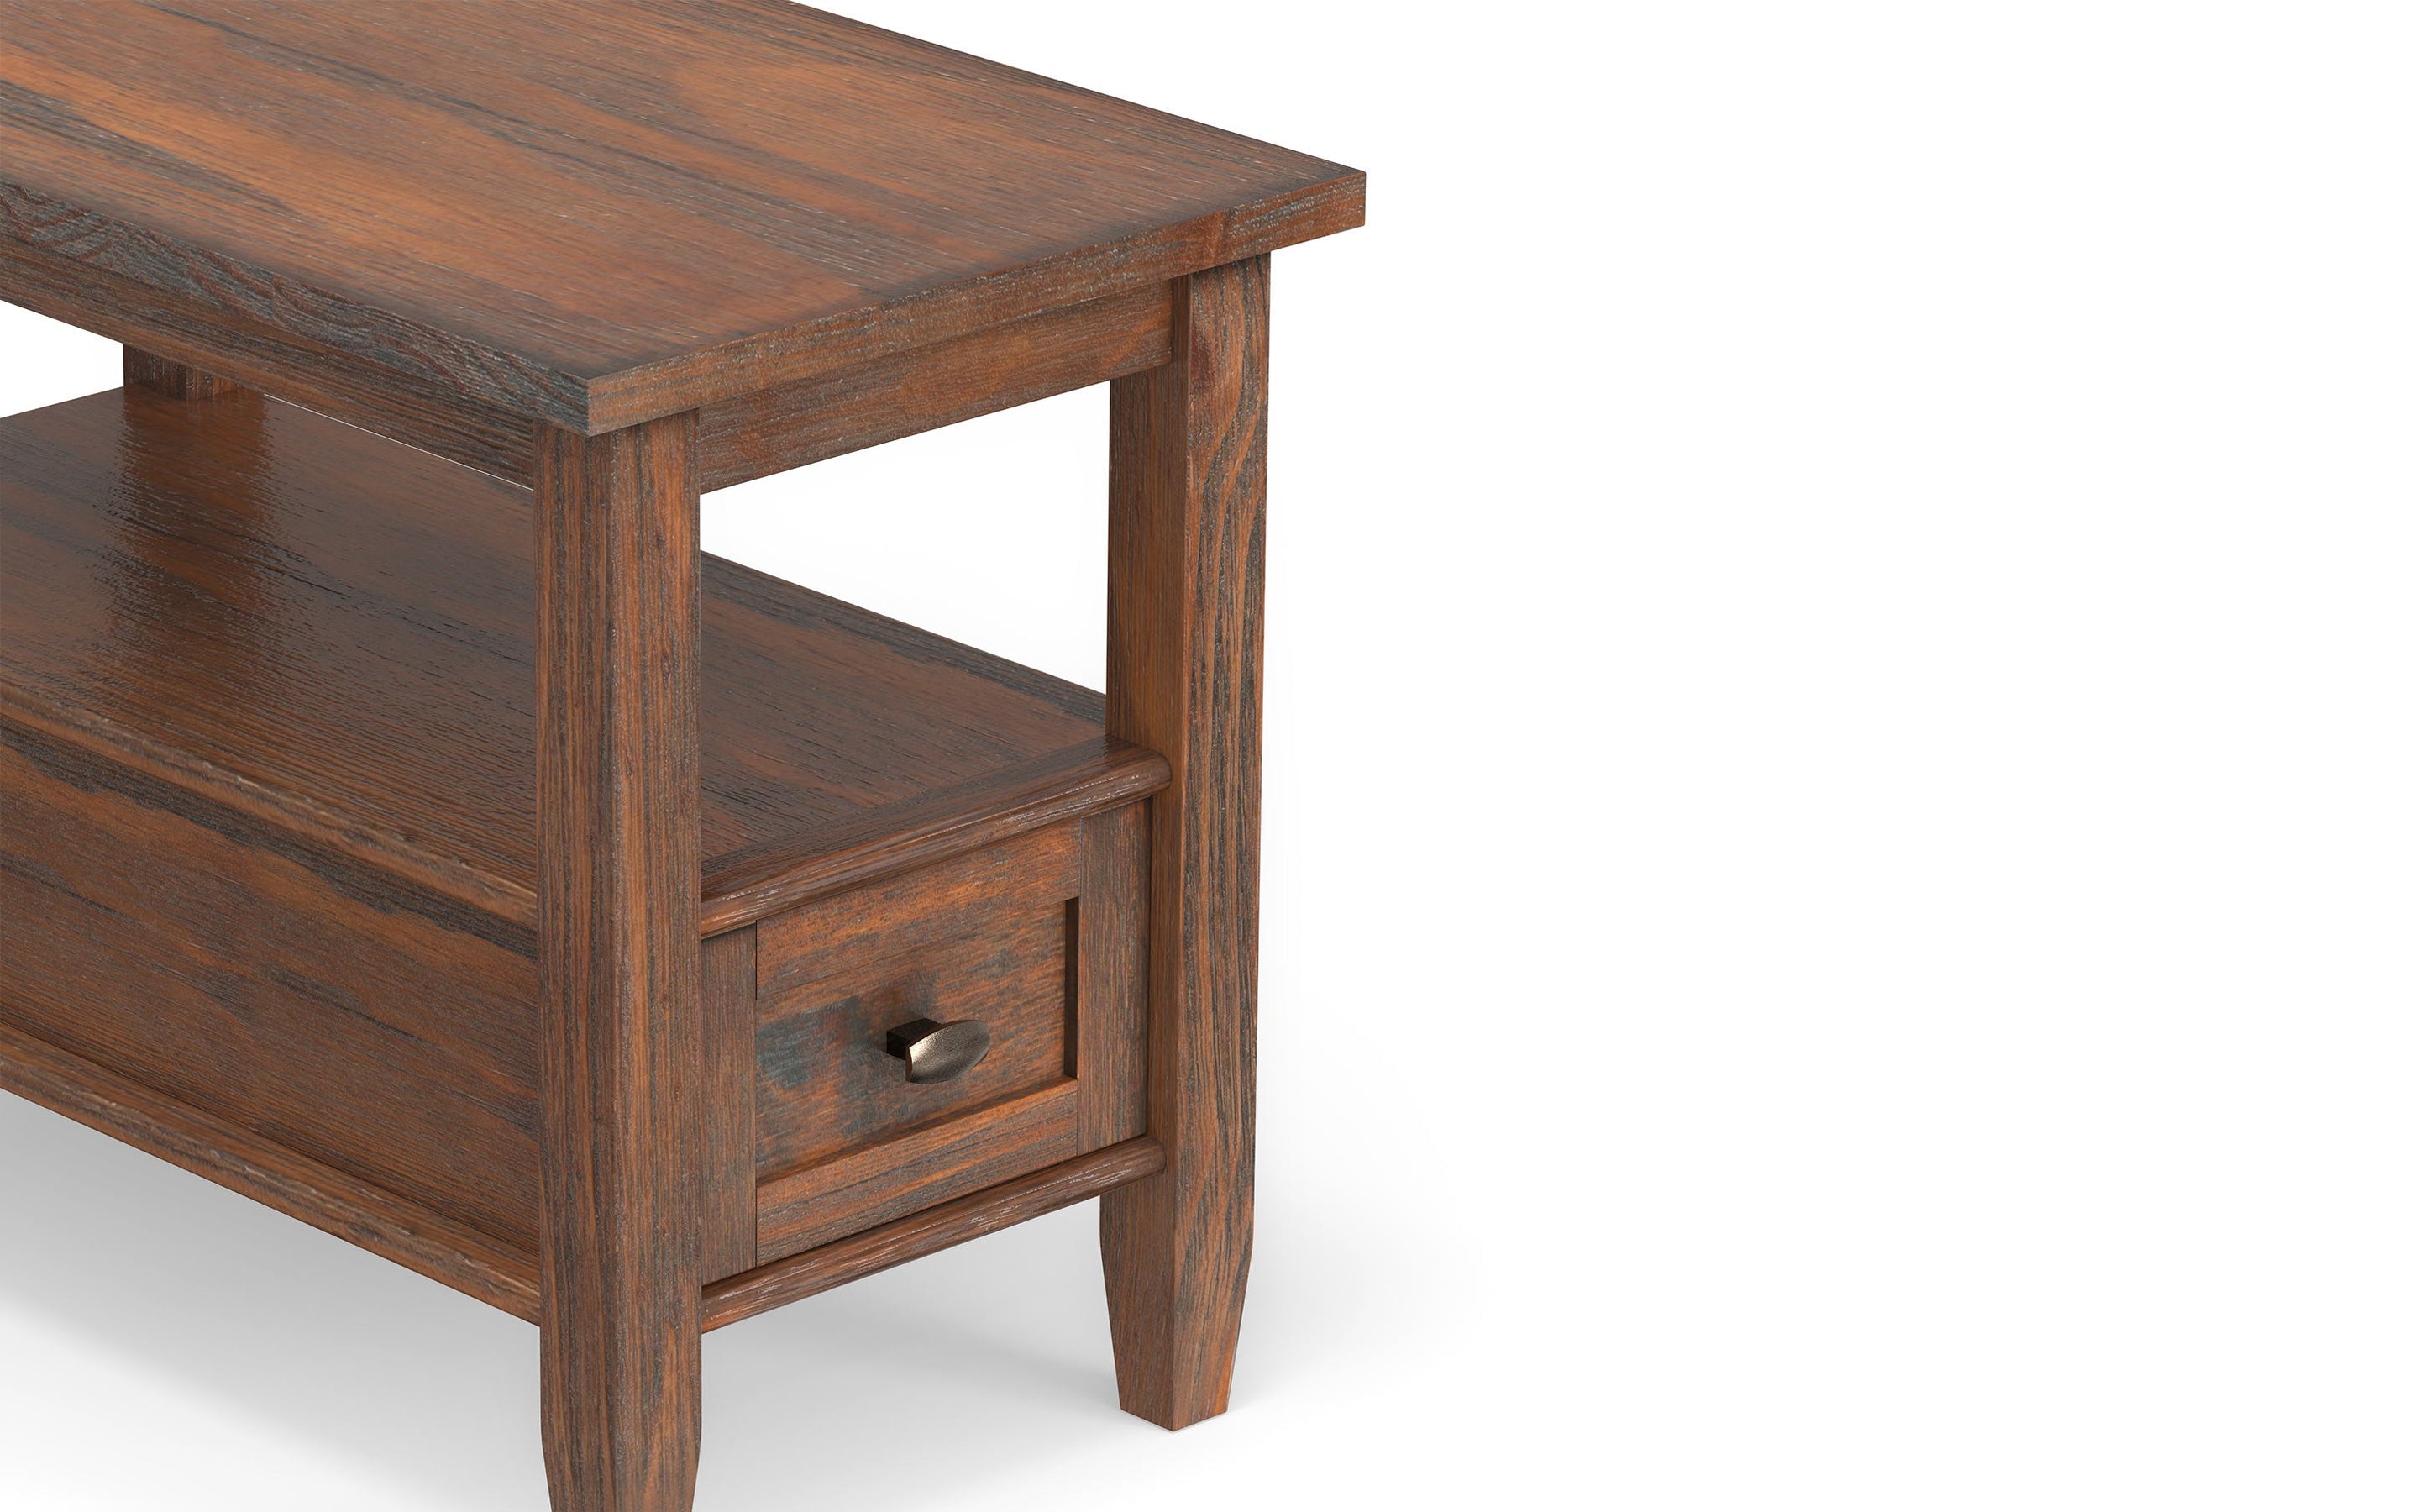 Distressed Charcoal Brown | Warm Shaker Narrow Side Table